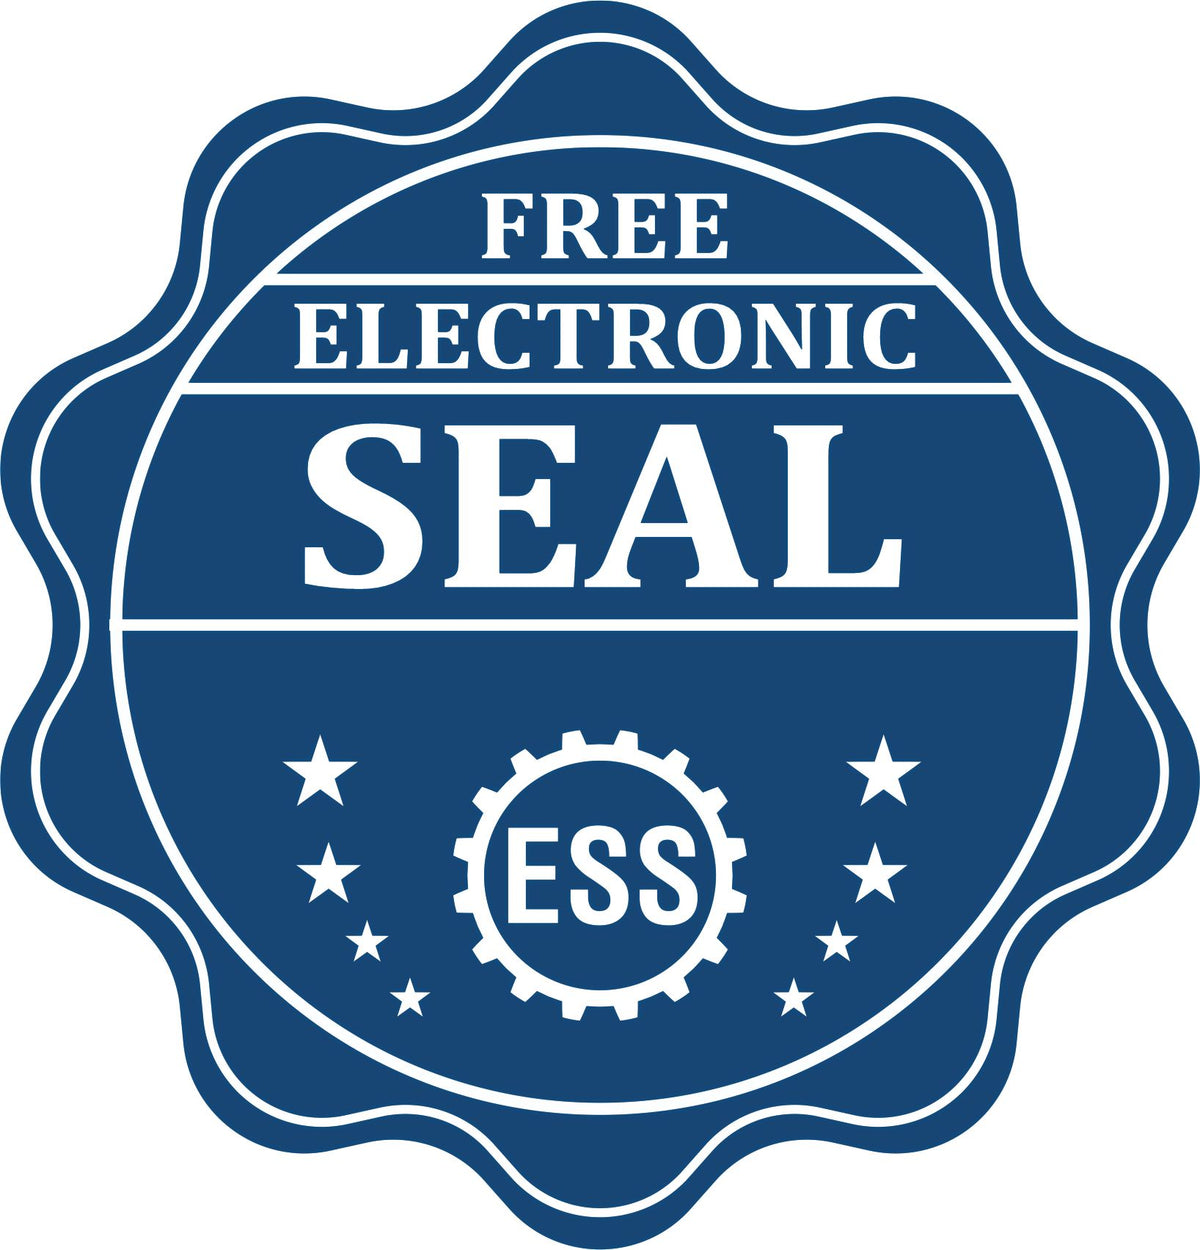 A badge showing a free electronic seal for the Premium MaxLight Pre-Inked Montana Landscape Architectural Stamp with stars and the ESS gear on the emblem.